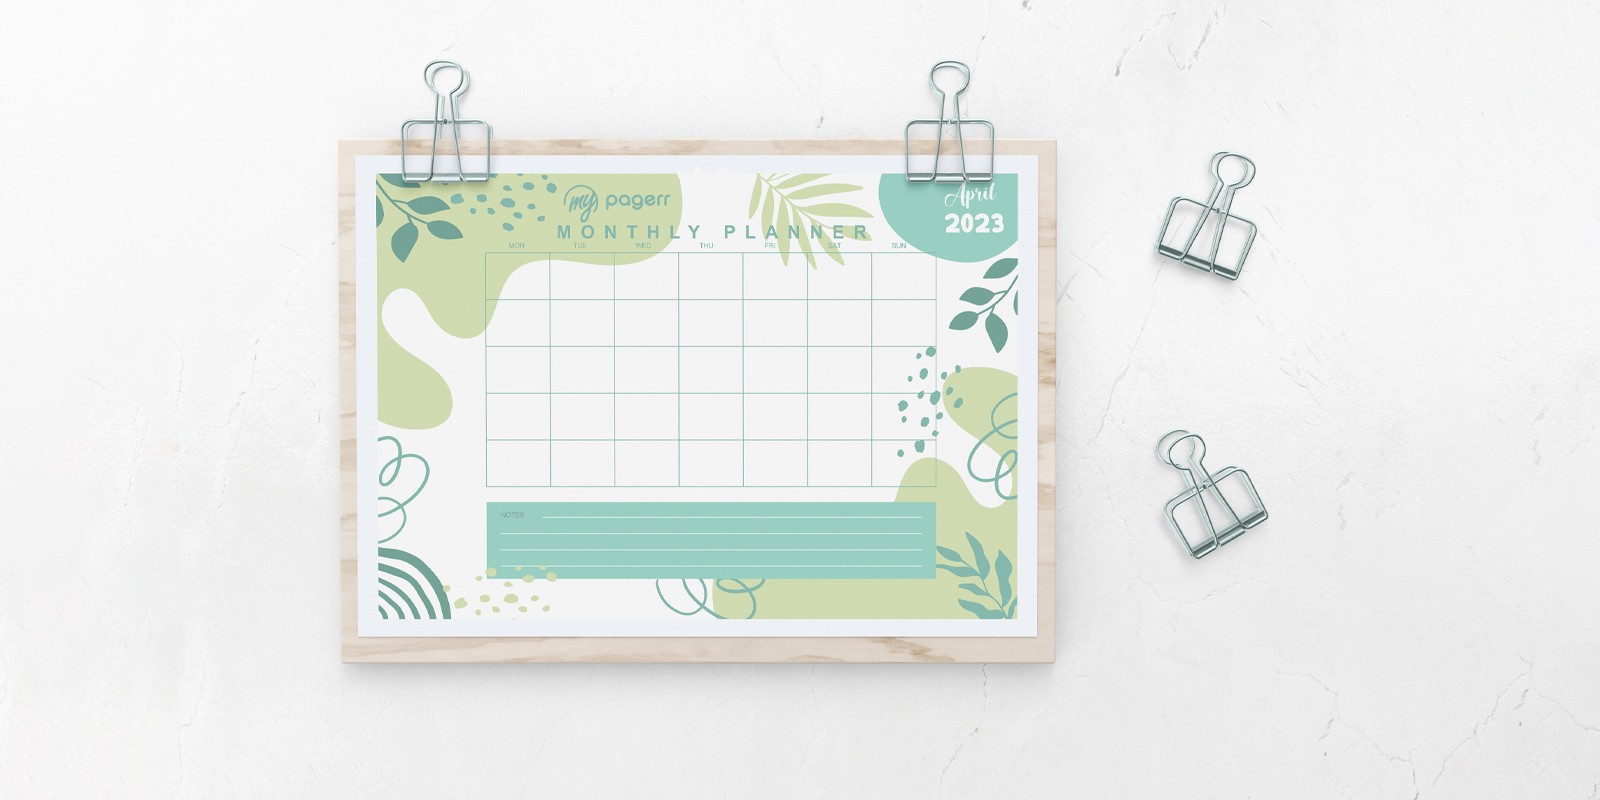 Calendar planners in Paris - Print with Pagerr